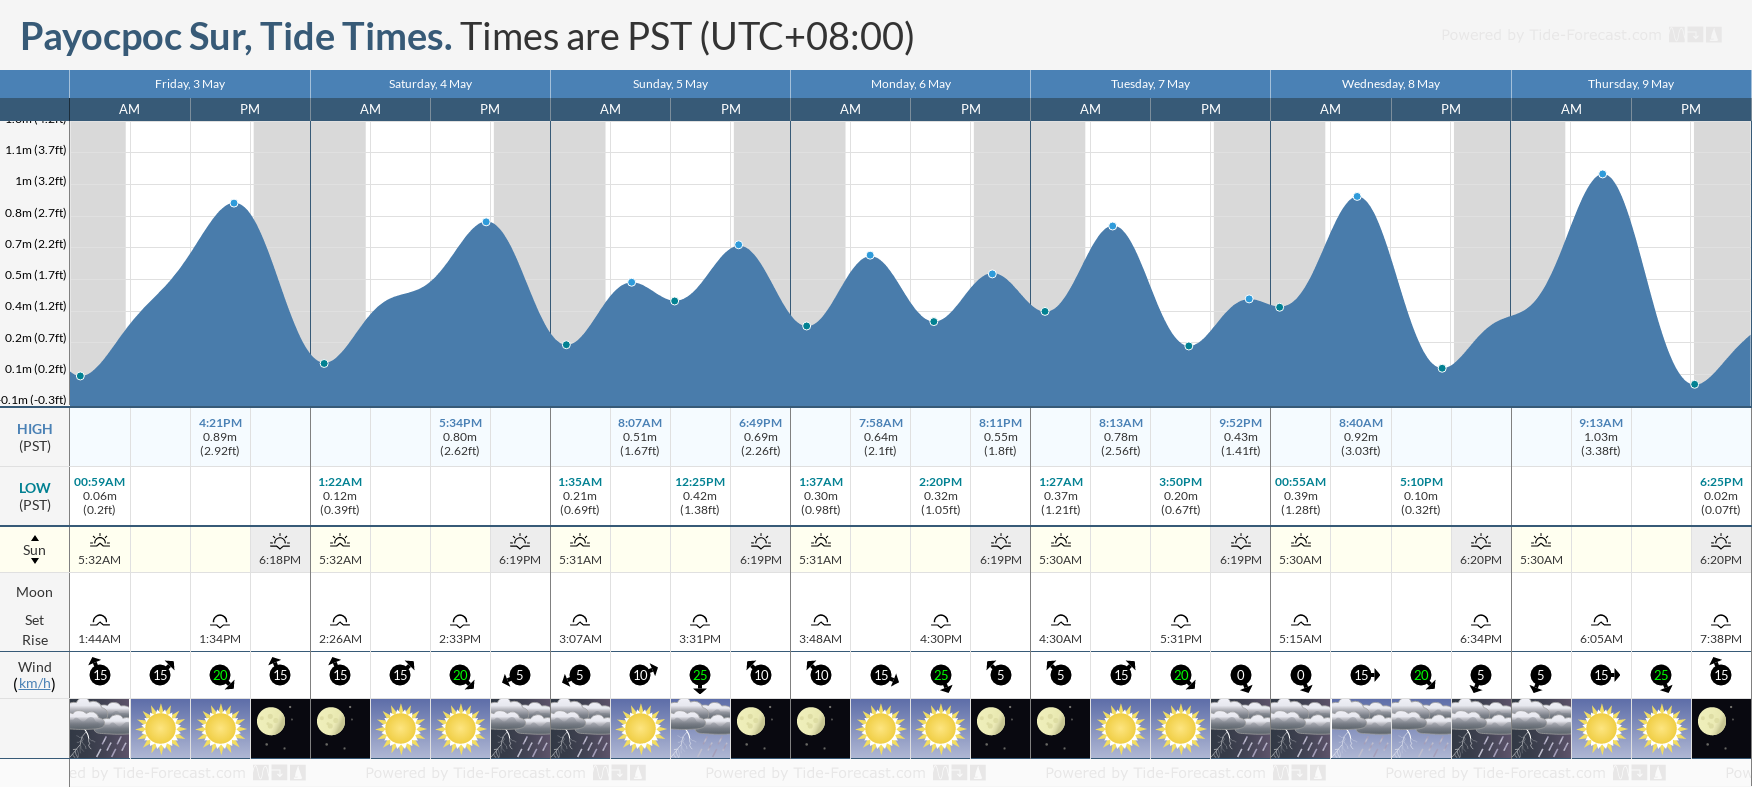 Payocpoc Sur Tide Chart including high and low tide tide times for the next 7 days